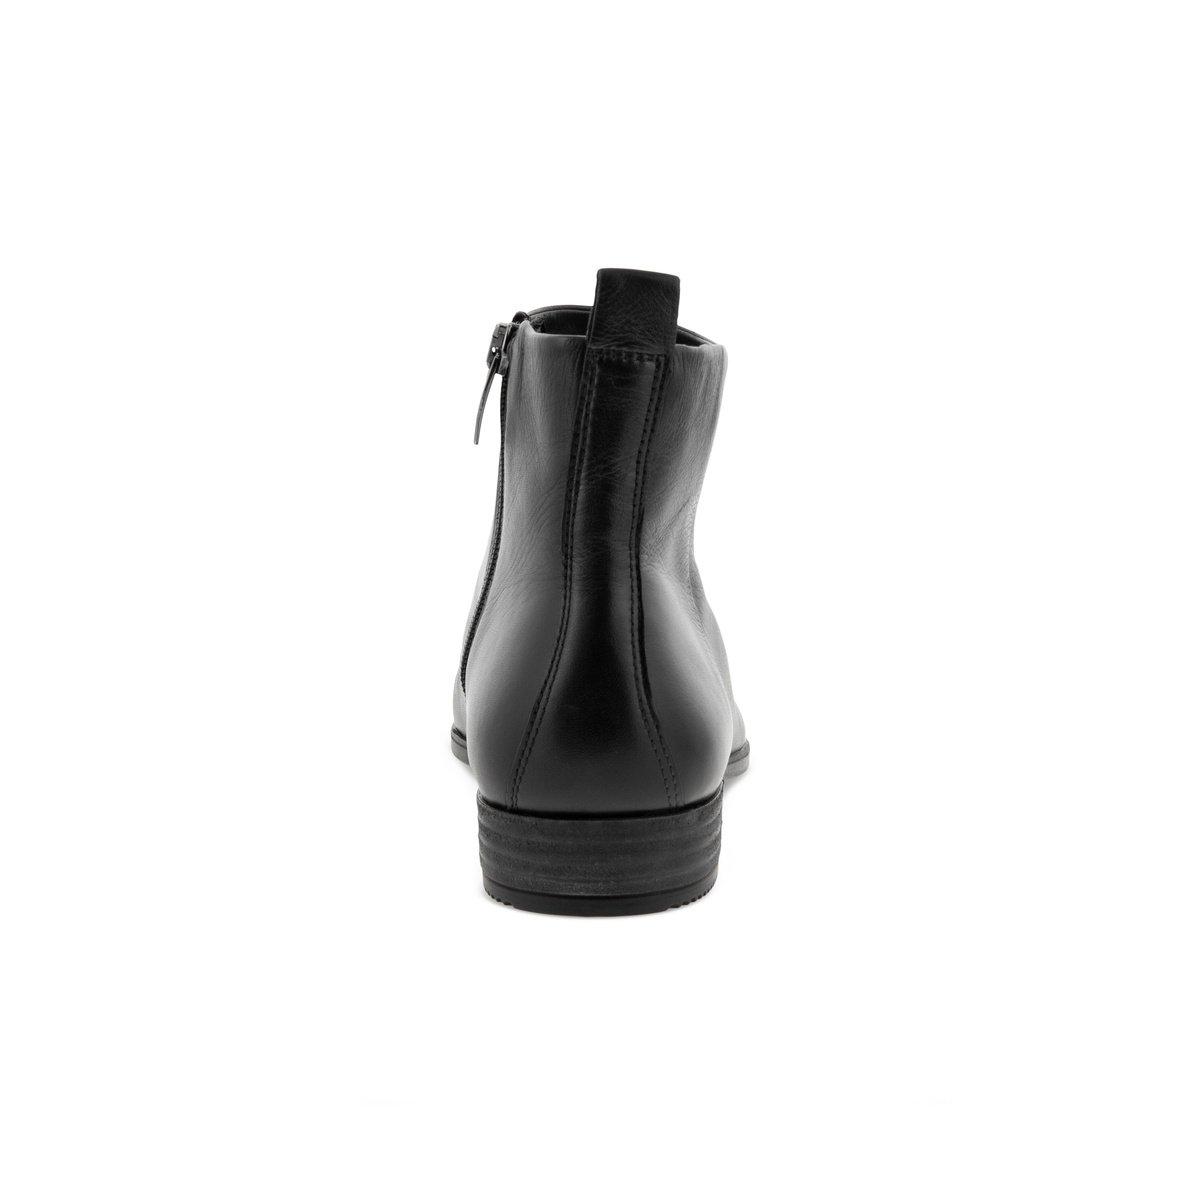 GIÀY BOOT ECCO NỮ SHAPE 20 POINTY 21423301001 222